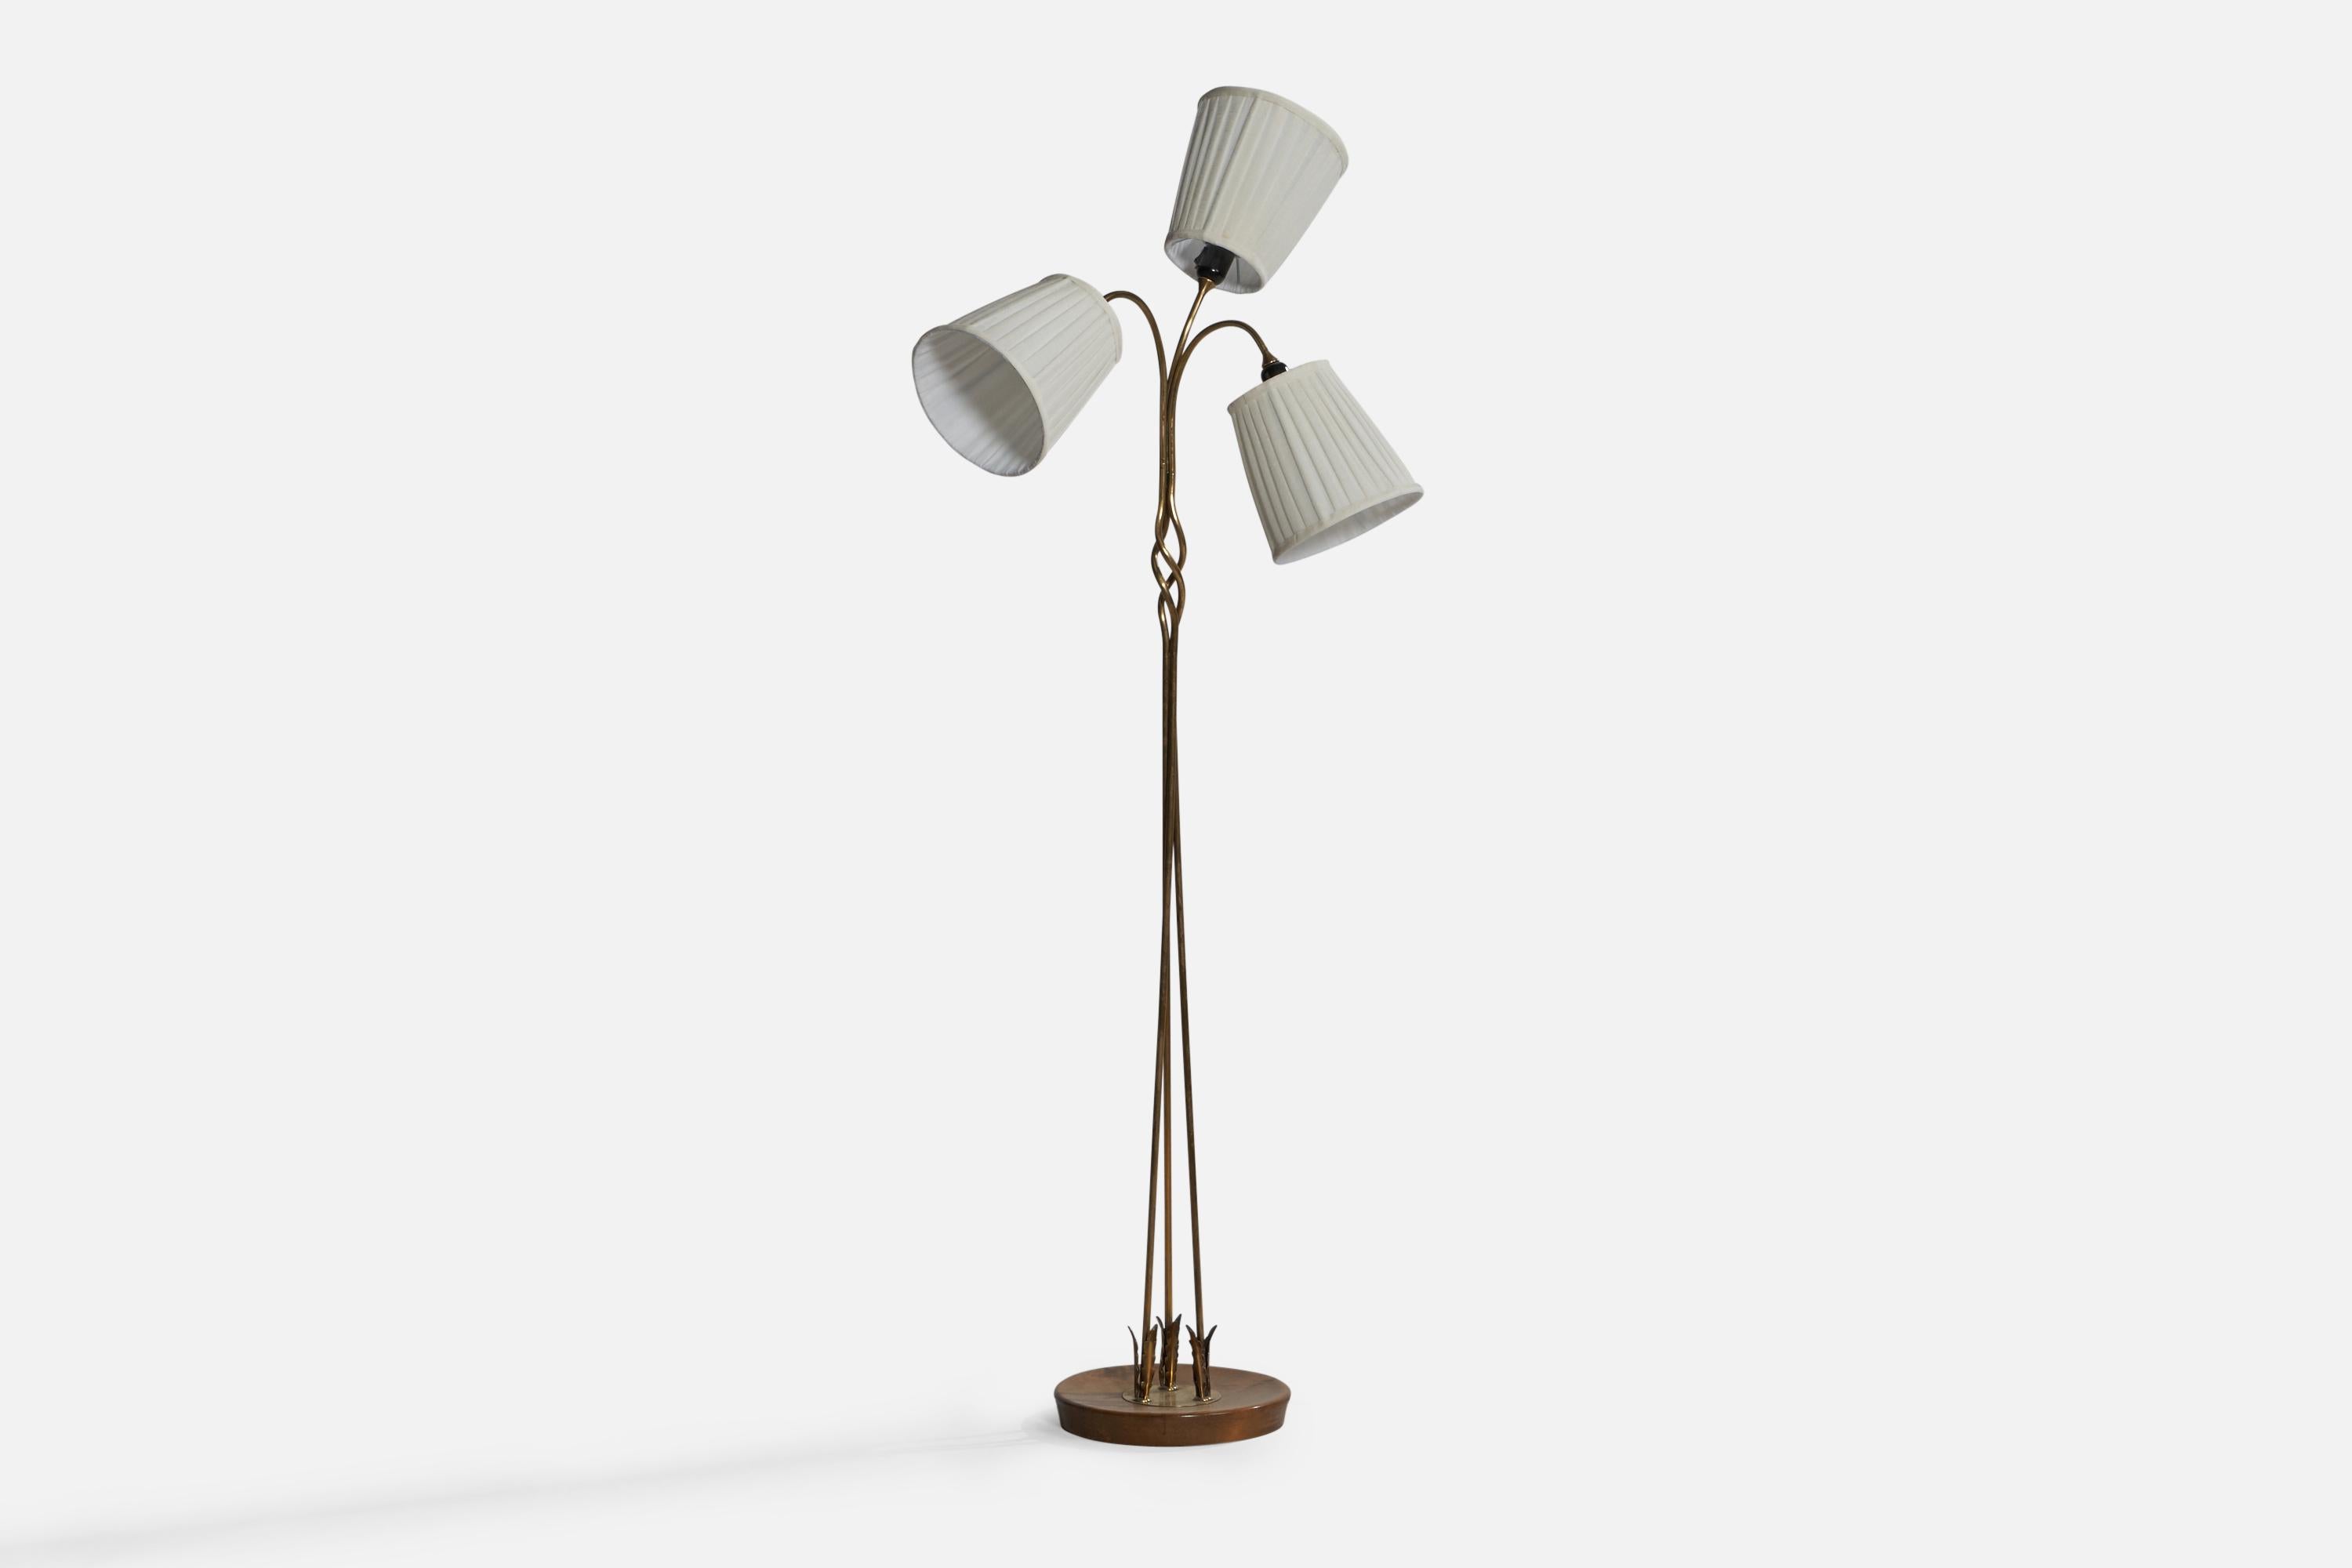 A three-armed brass, stained birch and white fabric floor lamp designed and produced in Finland, 1950s.

Overall Dimensions (inches): 66” H x 26” W x 24.75” D. Stated dimensions include shades.
Bulb Specifications: E-26 Bulbs
Number of Sockets: